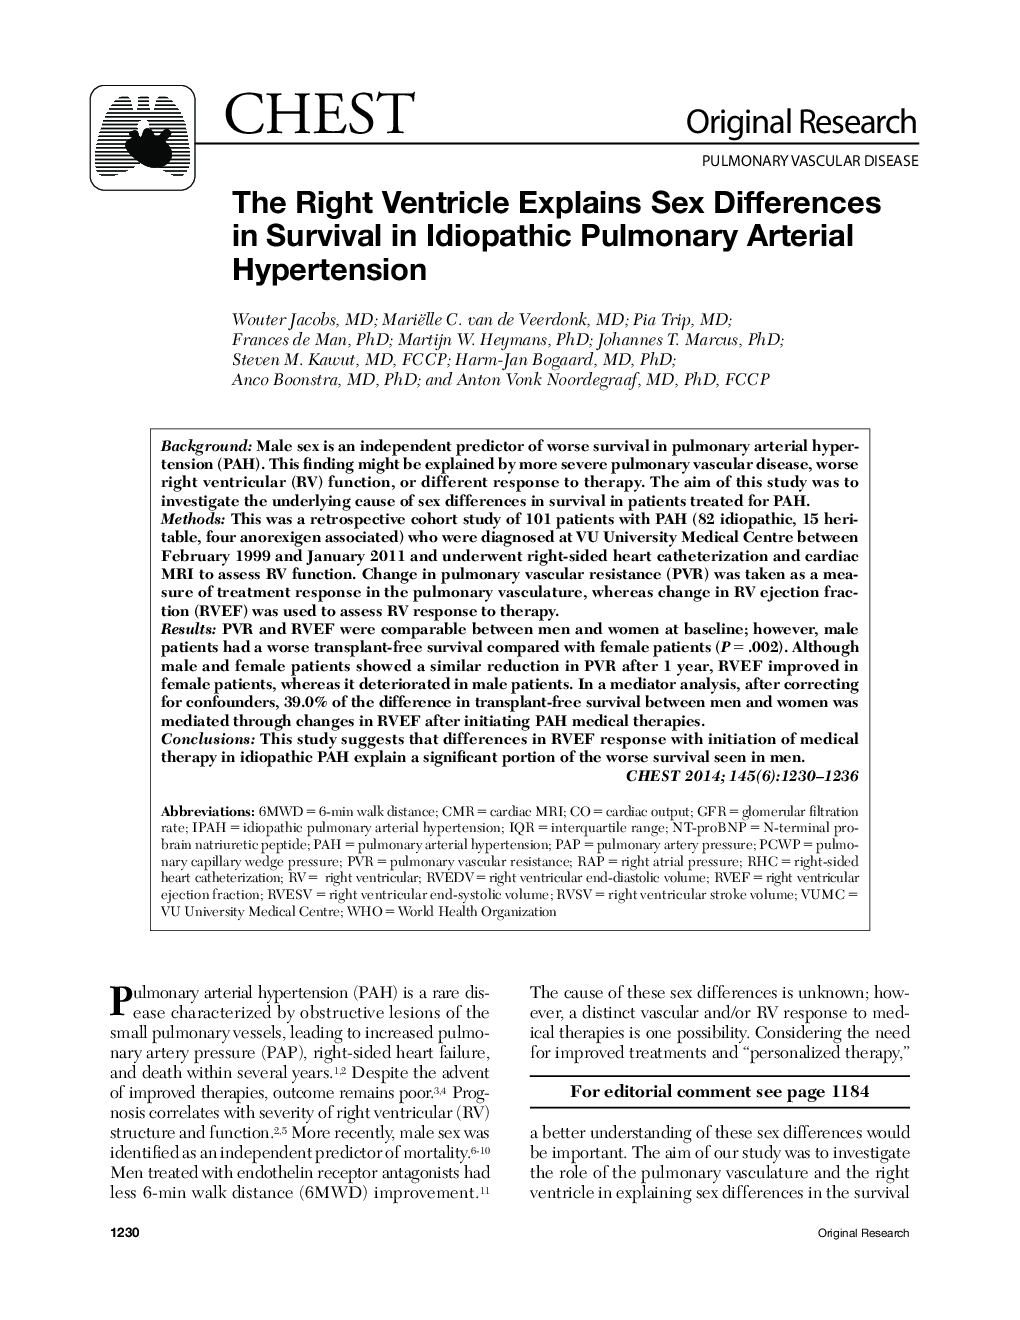 The Right Ventricle Explains Sex Differences in Survival in Idiopathic Pulmonary Arterial Hypertension